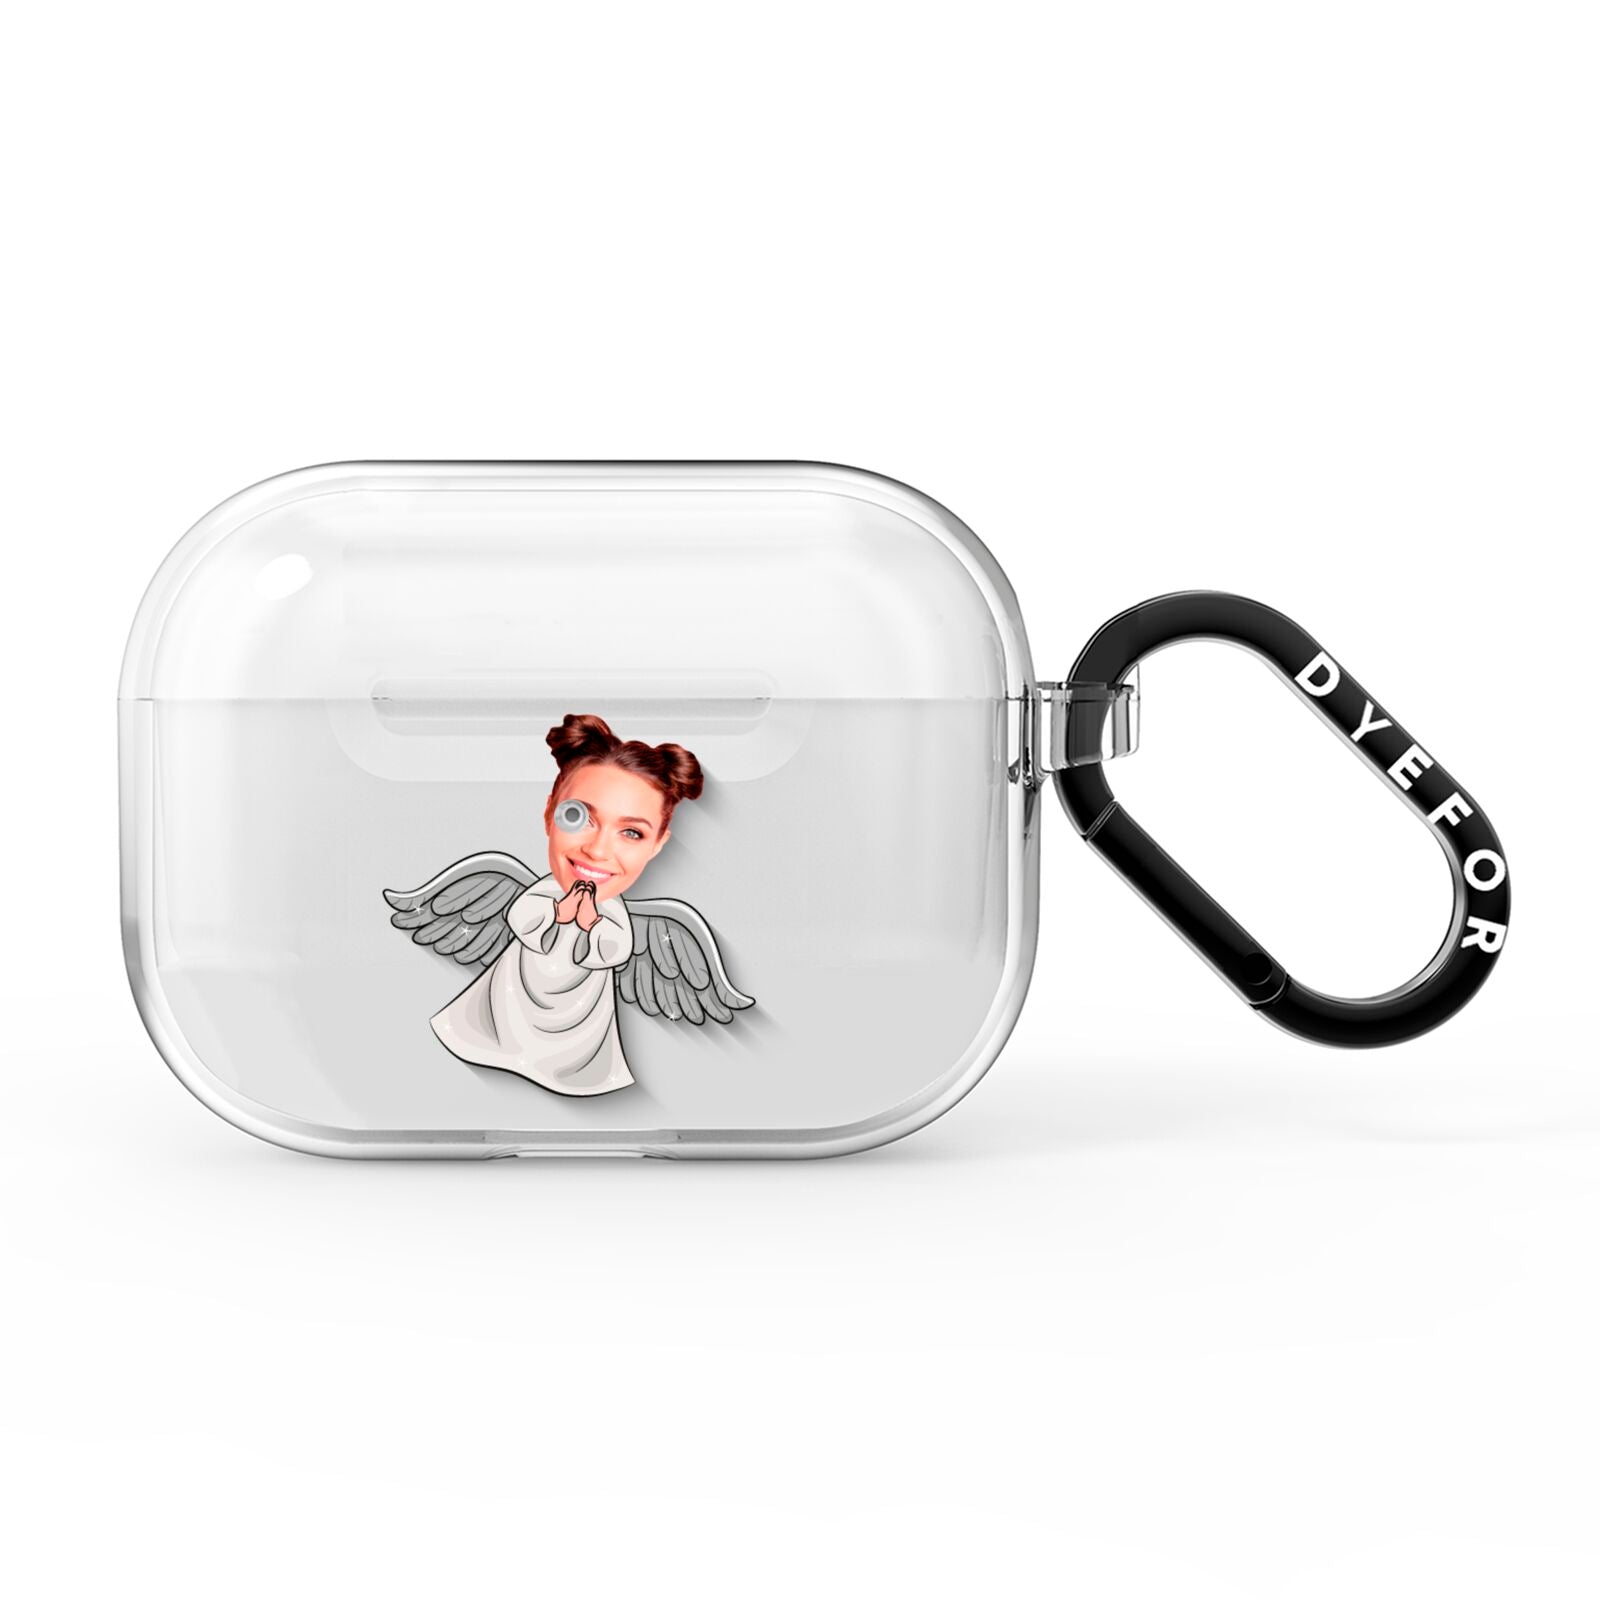 Angel Photo Face AirPods Pro Clear Case